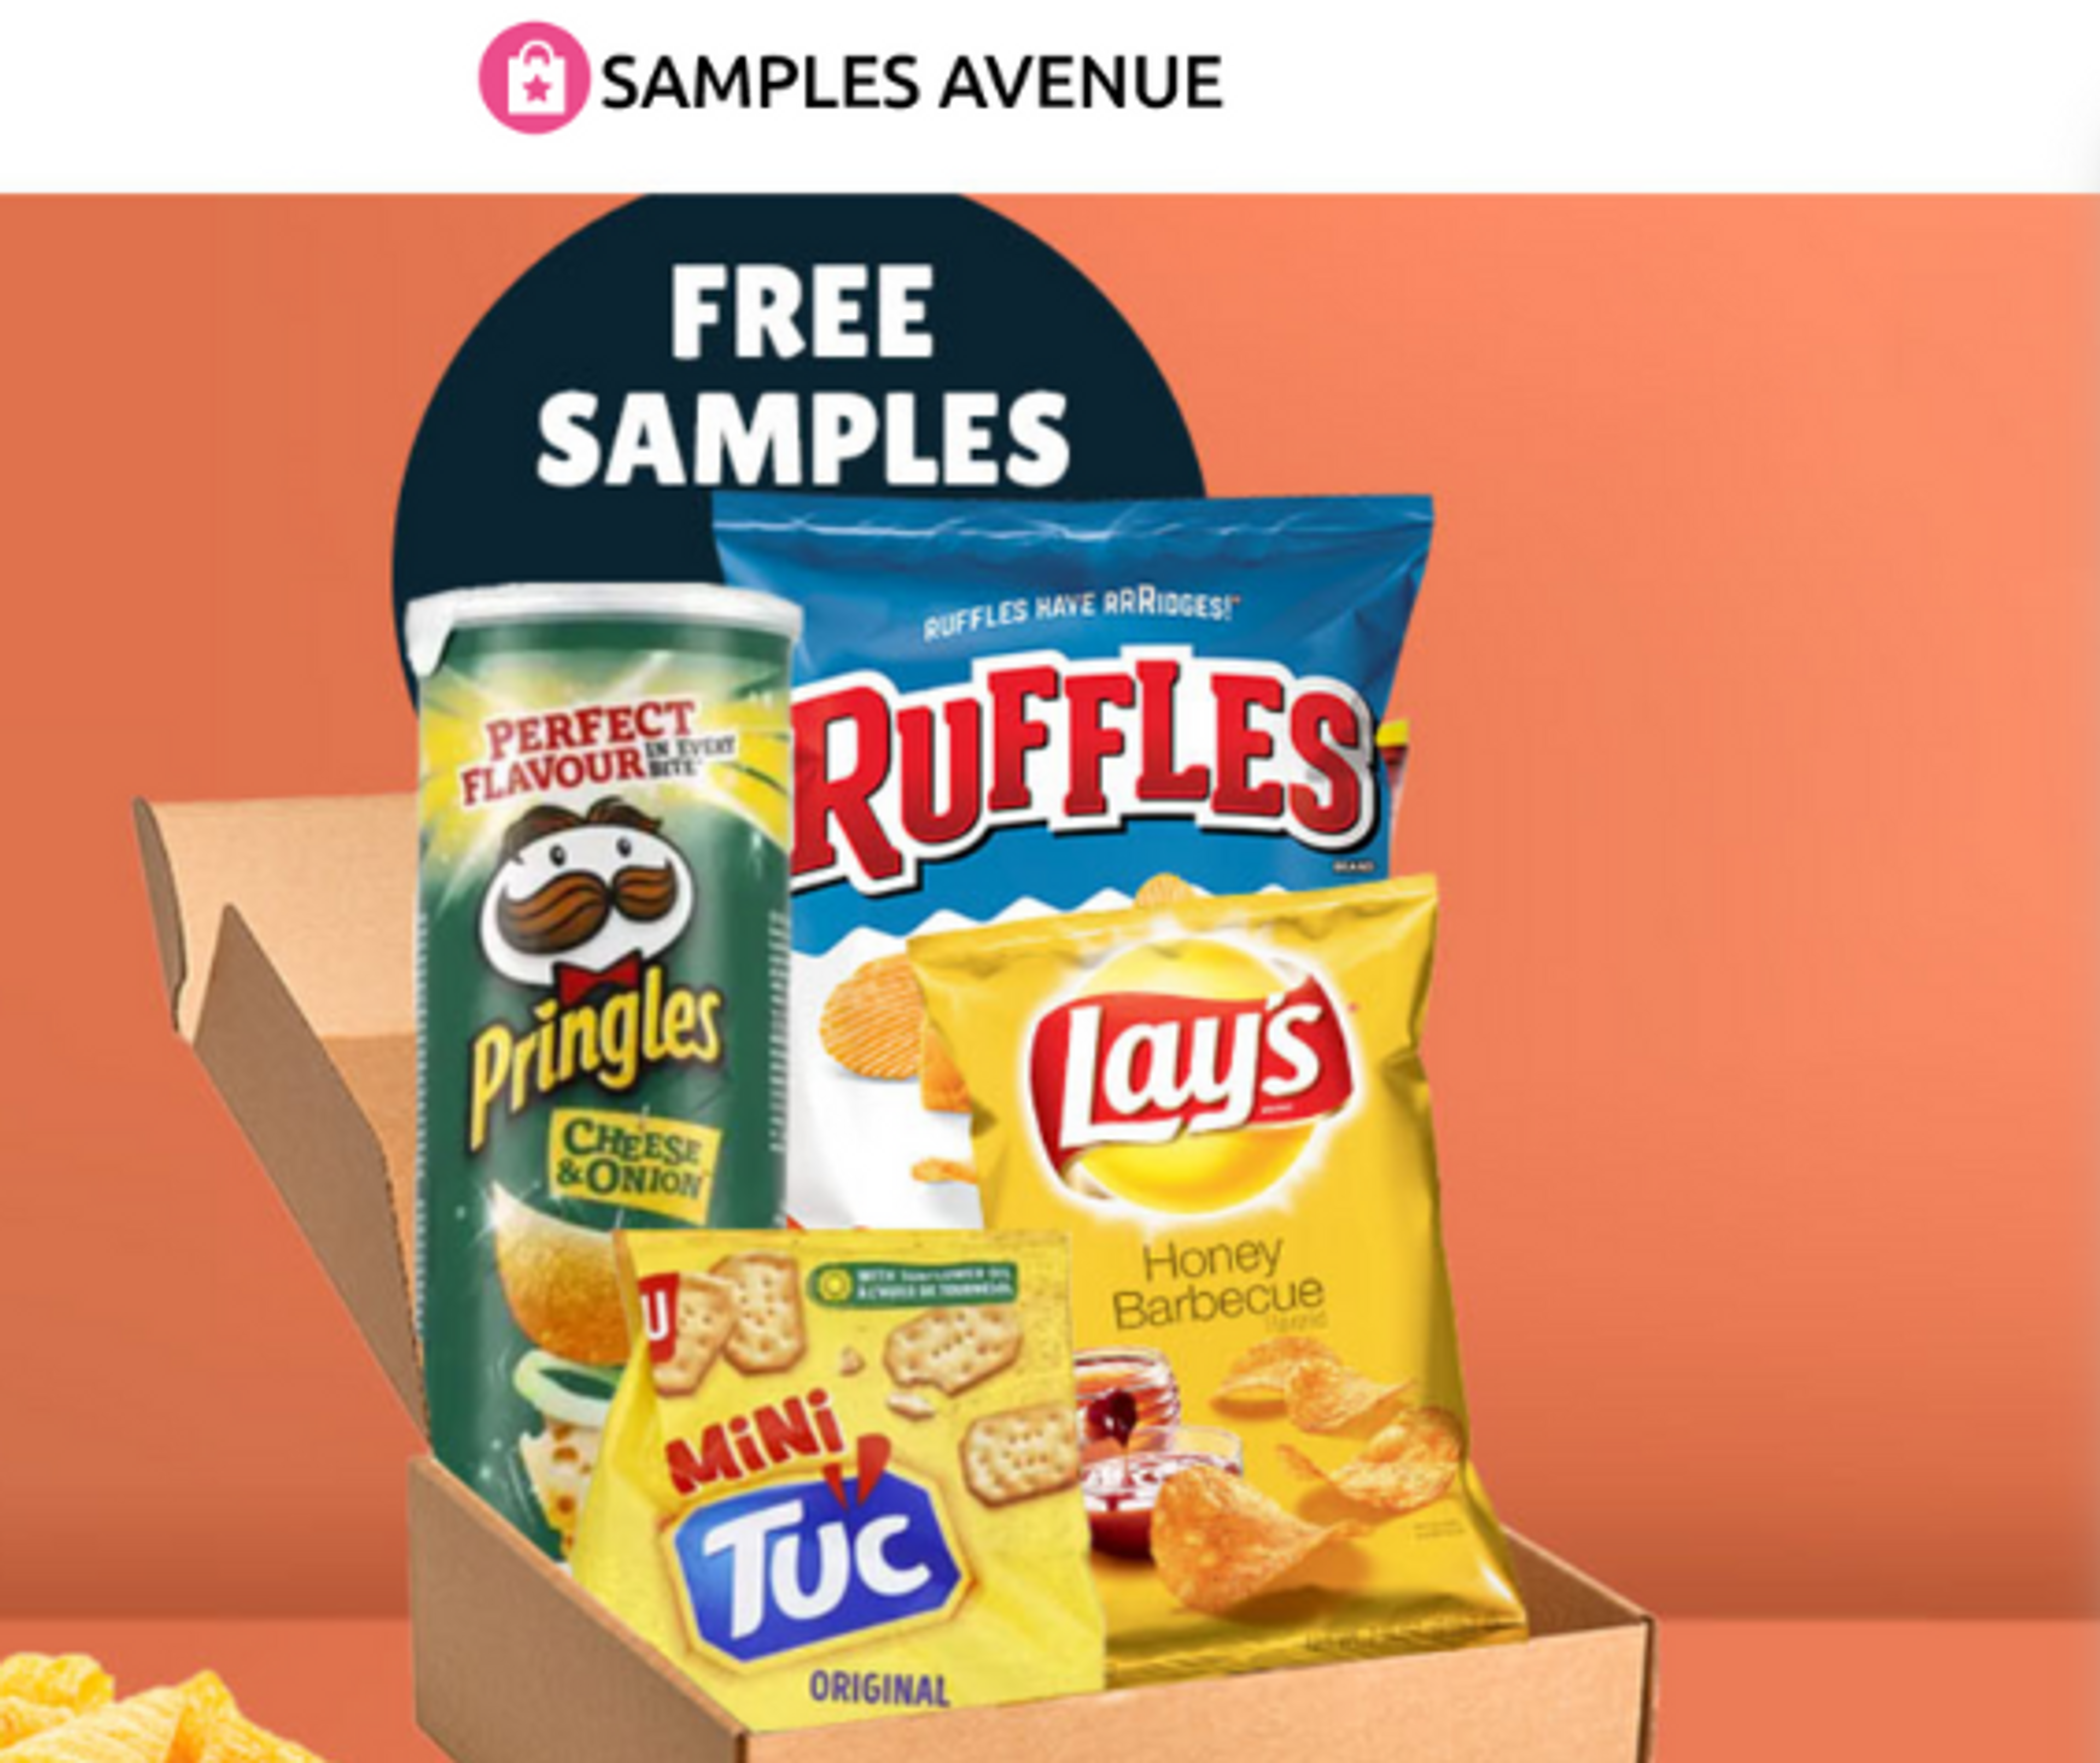 Free Chips Samples